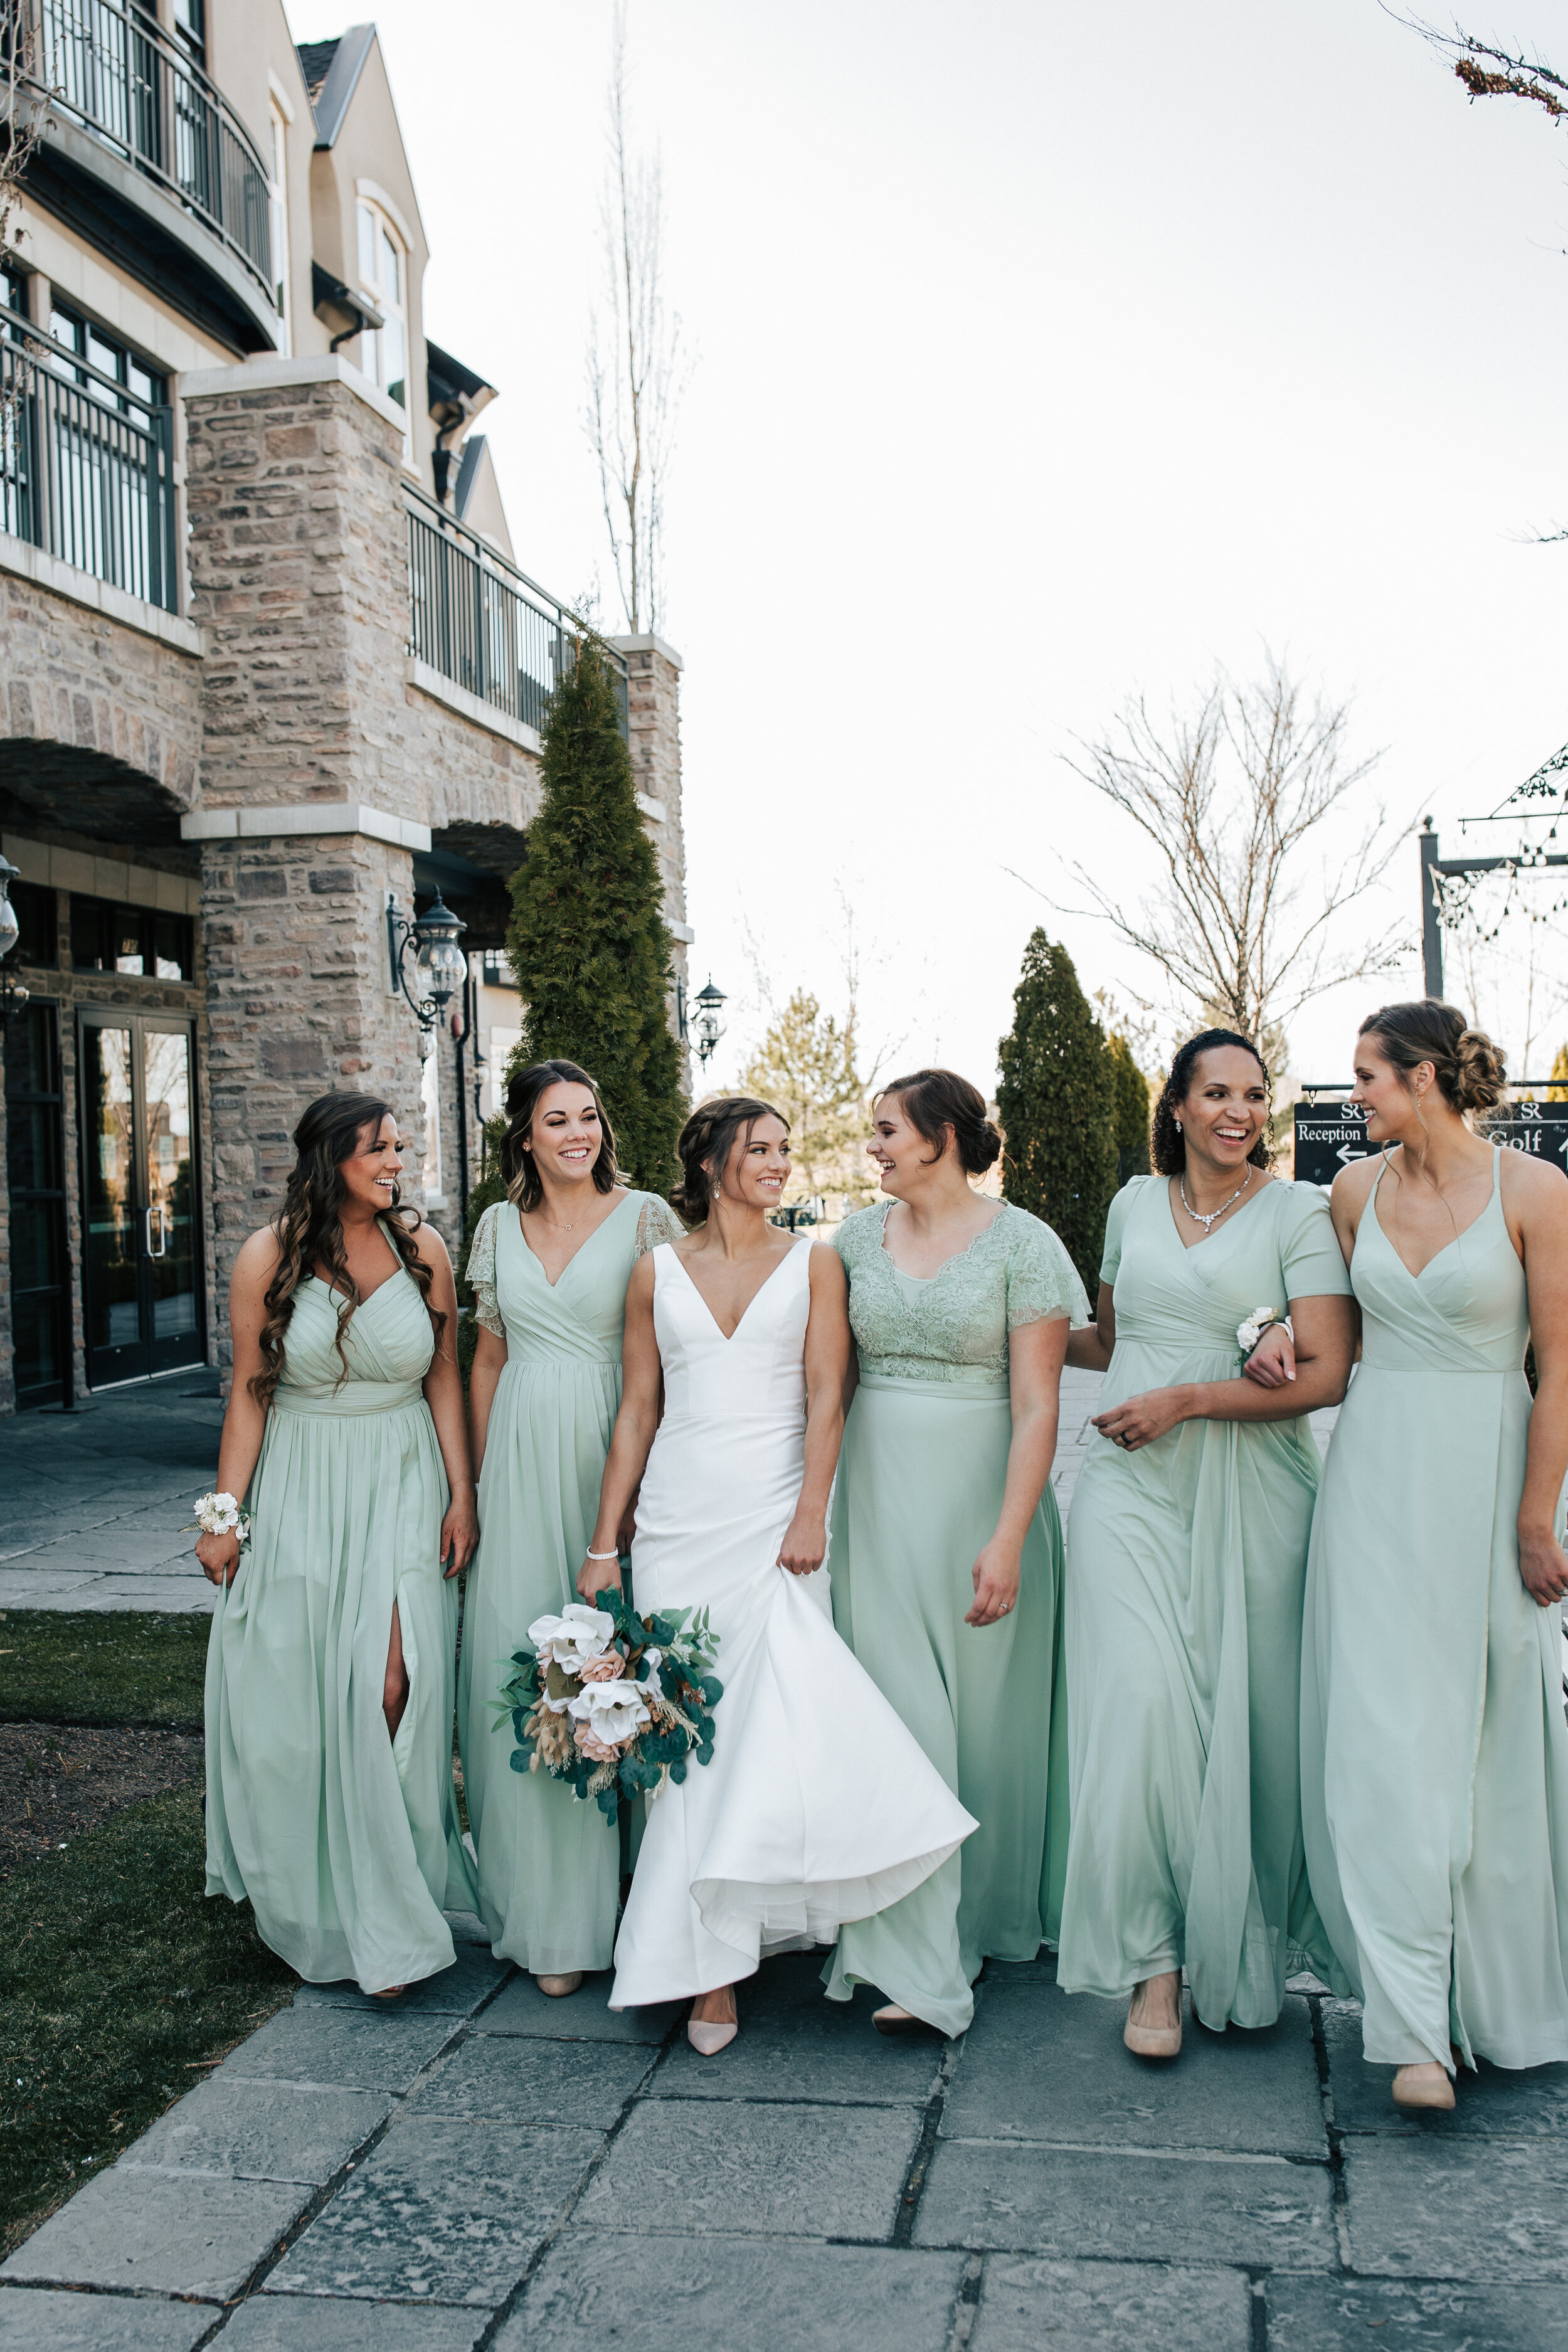  Bride in sleek and classy wedding gown walks and laughs with her bridesmaids who are wearing a light green color in Utah County at Sleepy Ridge Golf Course. bride and bridesmaids light green bridesmaids dresses #emilyjenkinsphotography #emilyjenkins